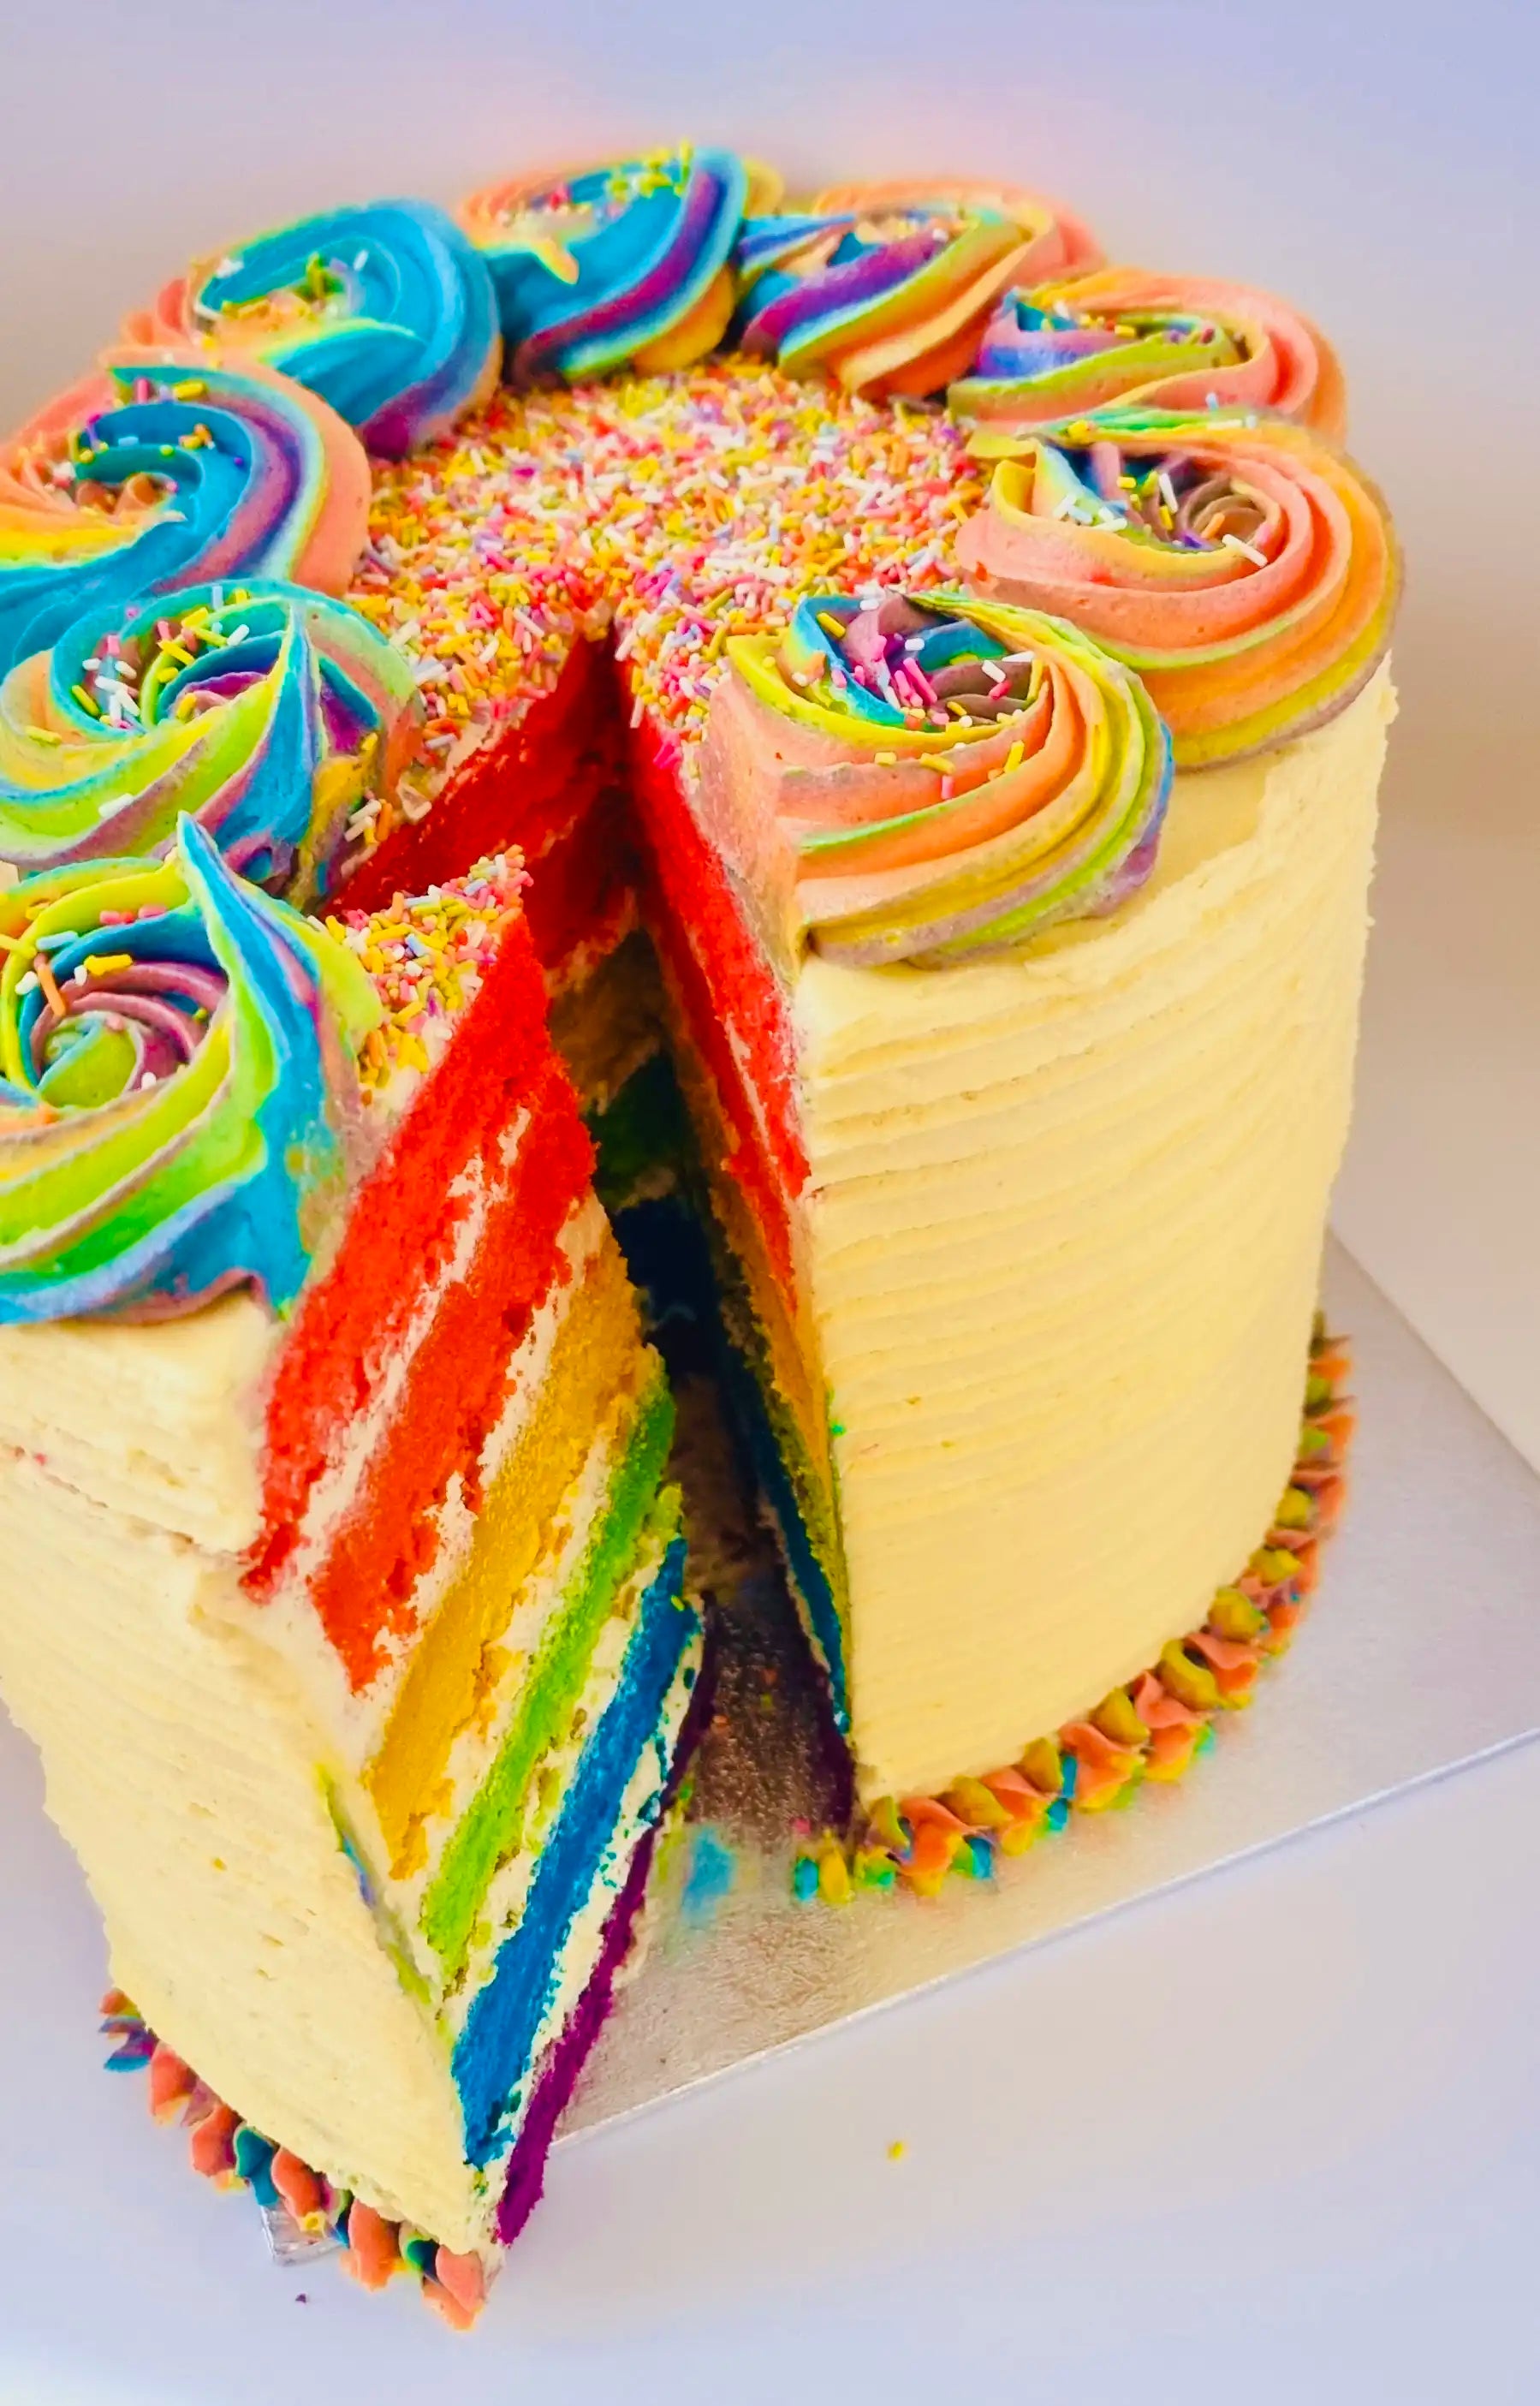 A-C05) Rainbow Cake – The ROYALS Cafe